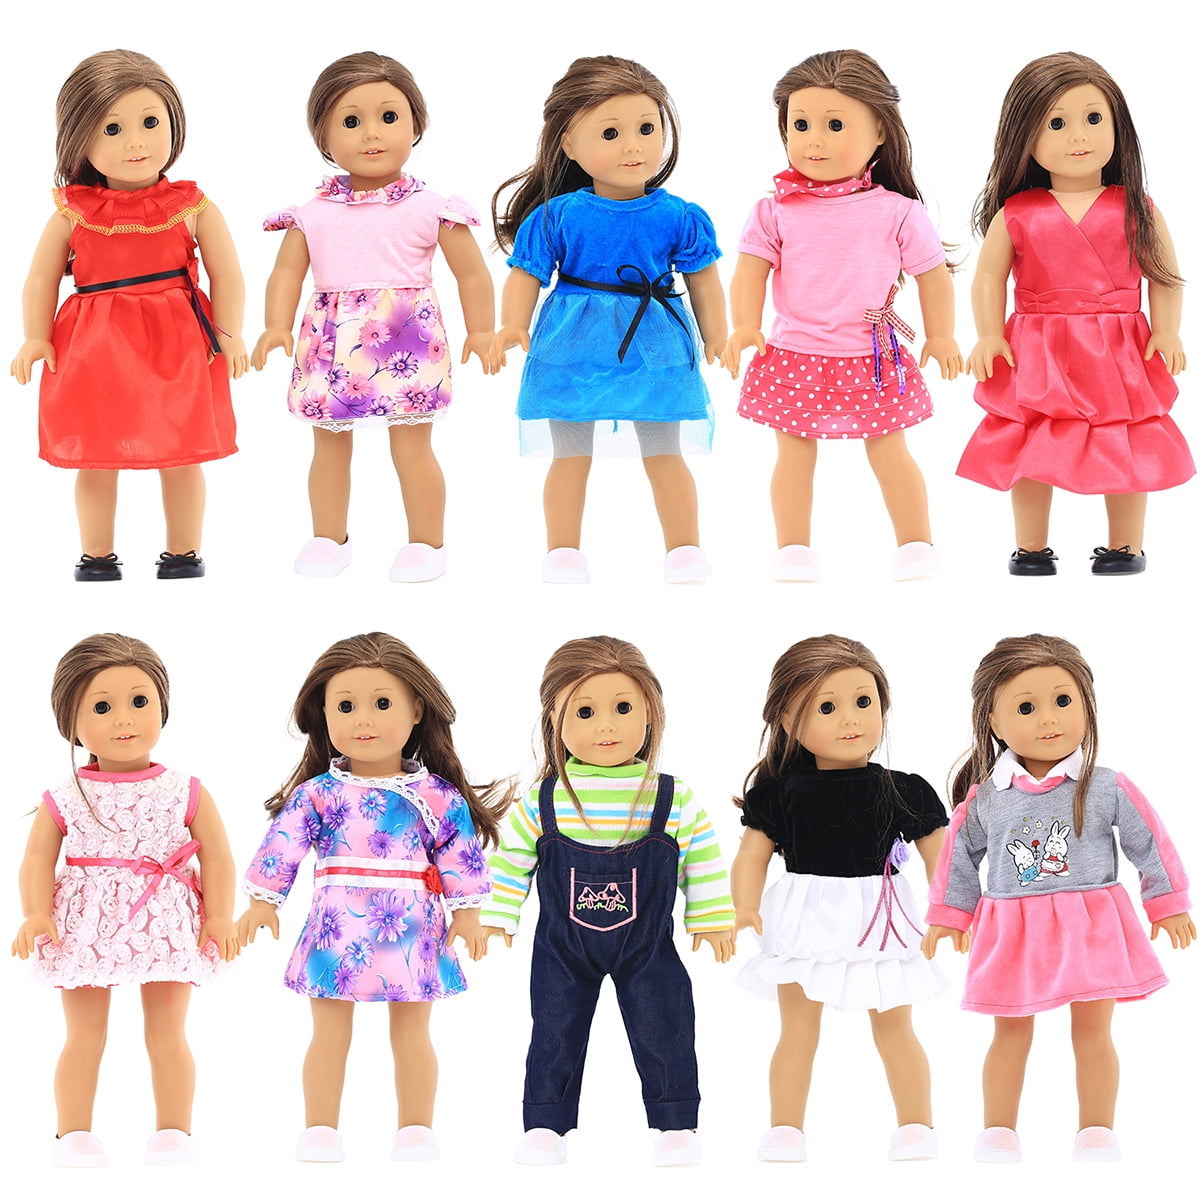 18 inches Doll Clothes 10 Different Unique Styles Well Fit for